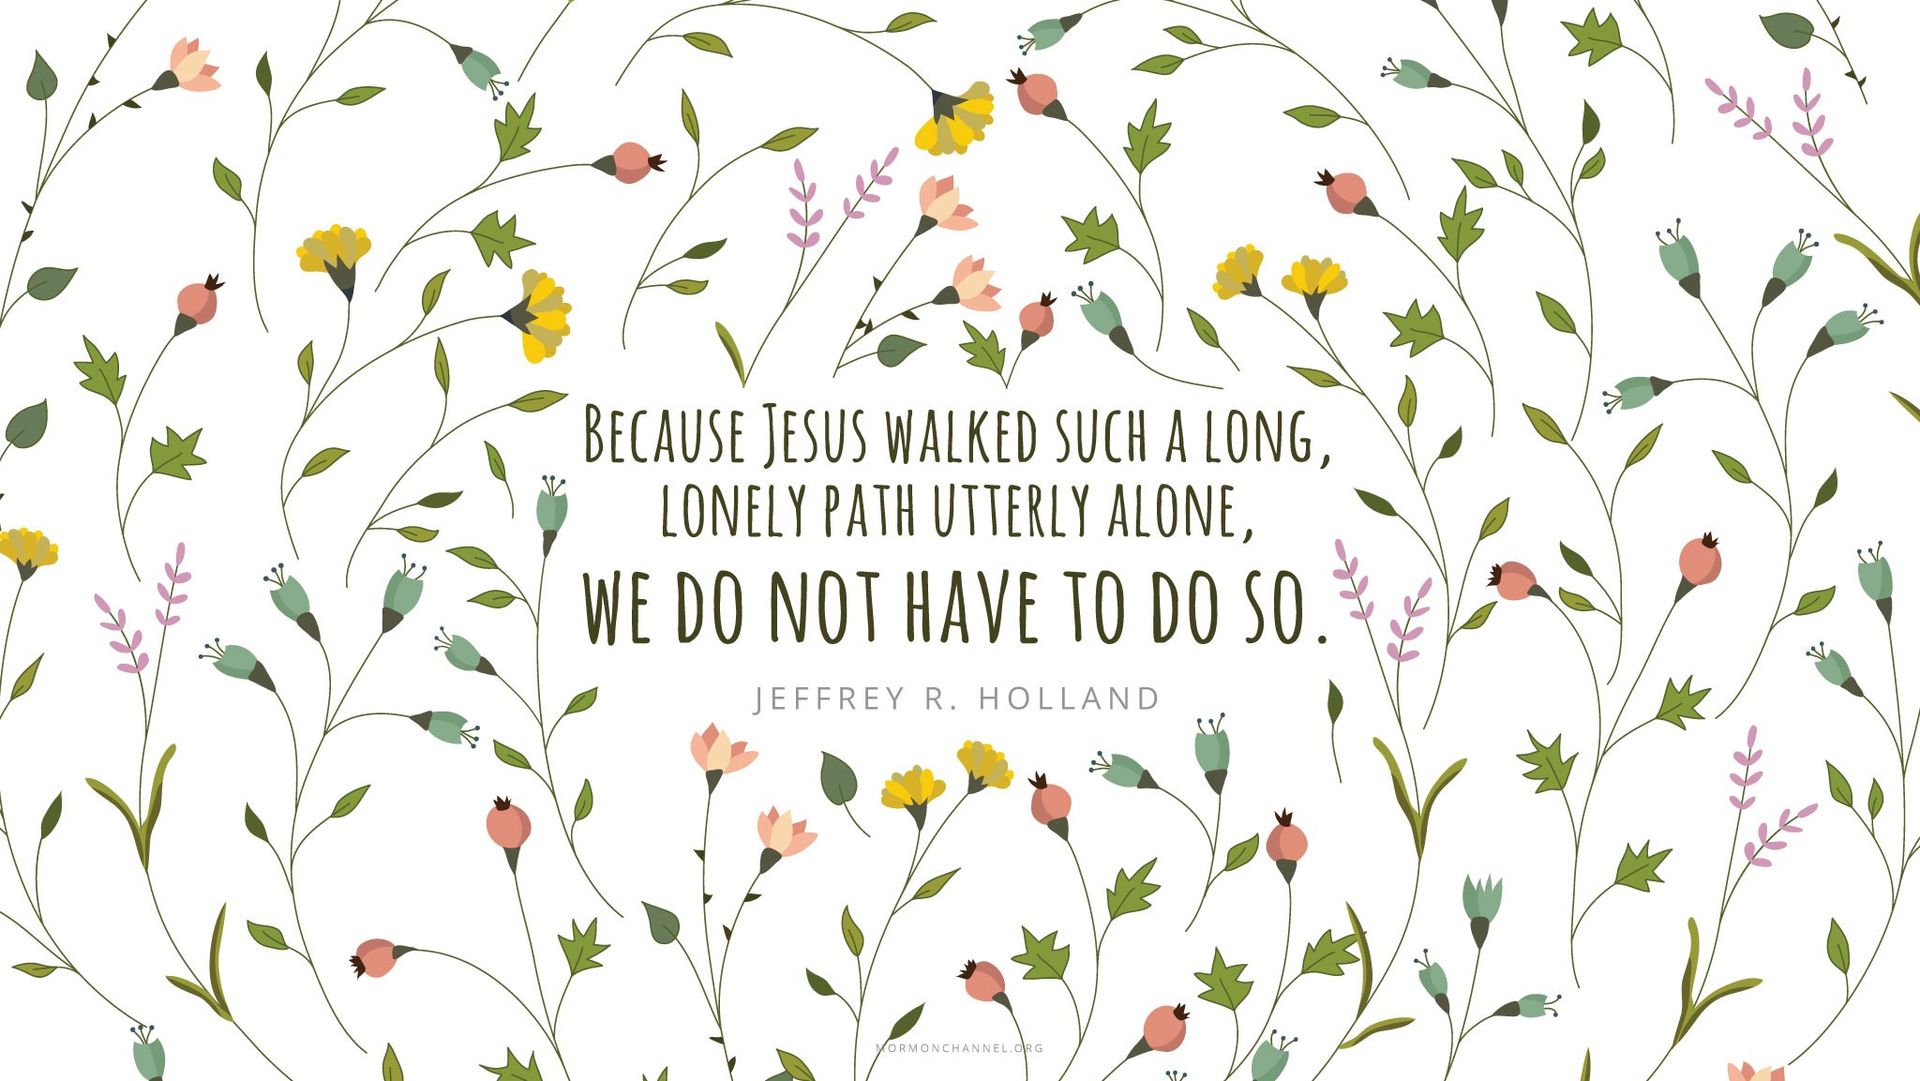 “Because Jesus walked such a long, lonely path utterly alone, we do not have to do so.”—Elder Jeffrey R. Holland, “None Were with Him” © undefined ipCode 1.